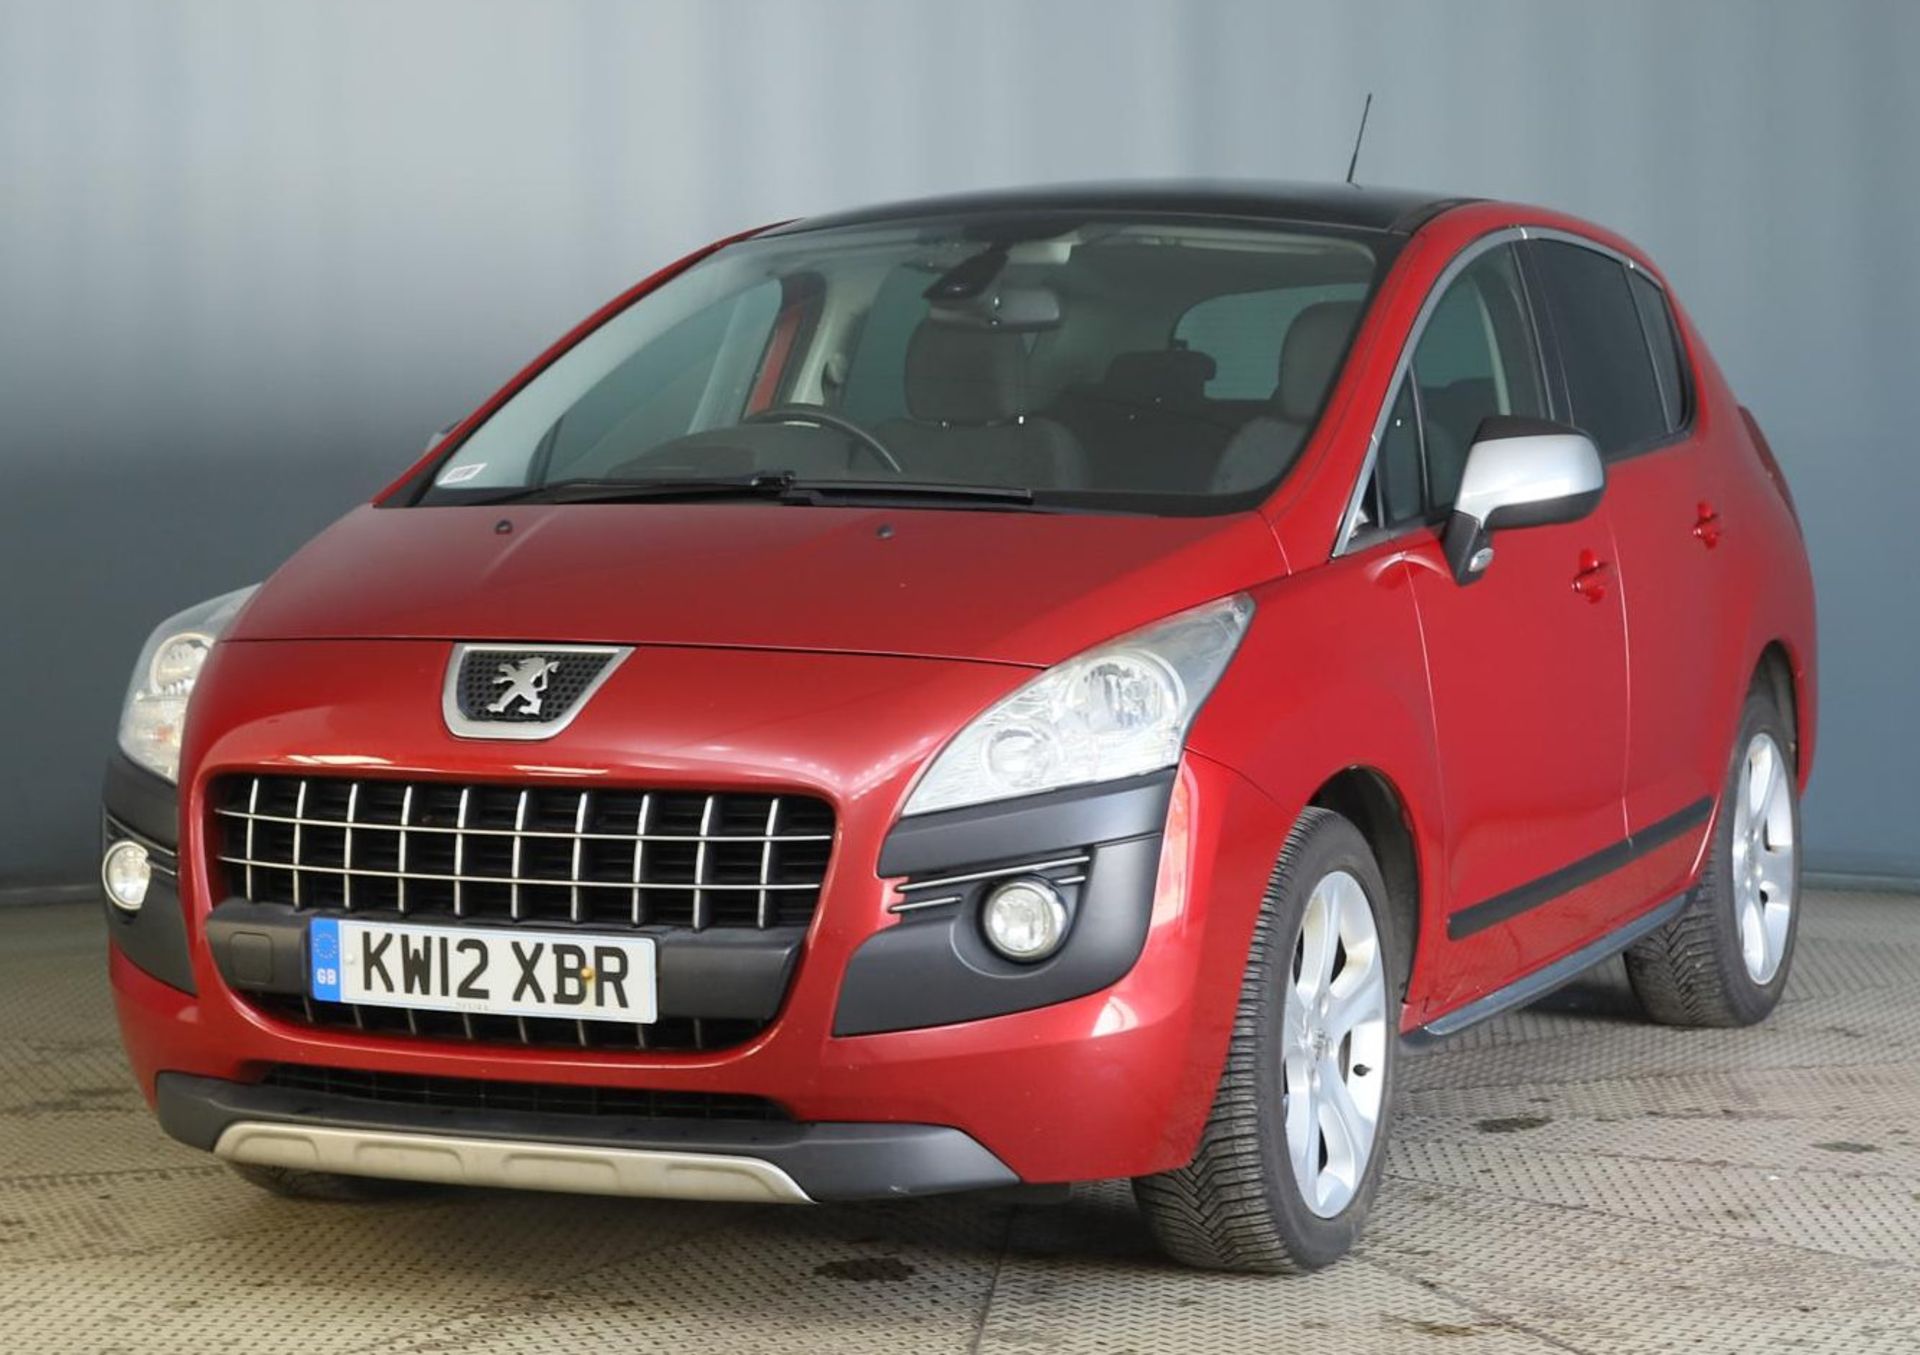 2012 Peugeot 3008 2.0 Hdi Allure 5 Door MPV - CL505 - NO VAT ON THE HAMMER - Location: Corby, Northa - Image 7 of 12